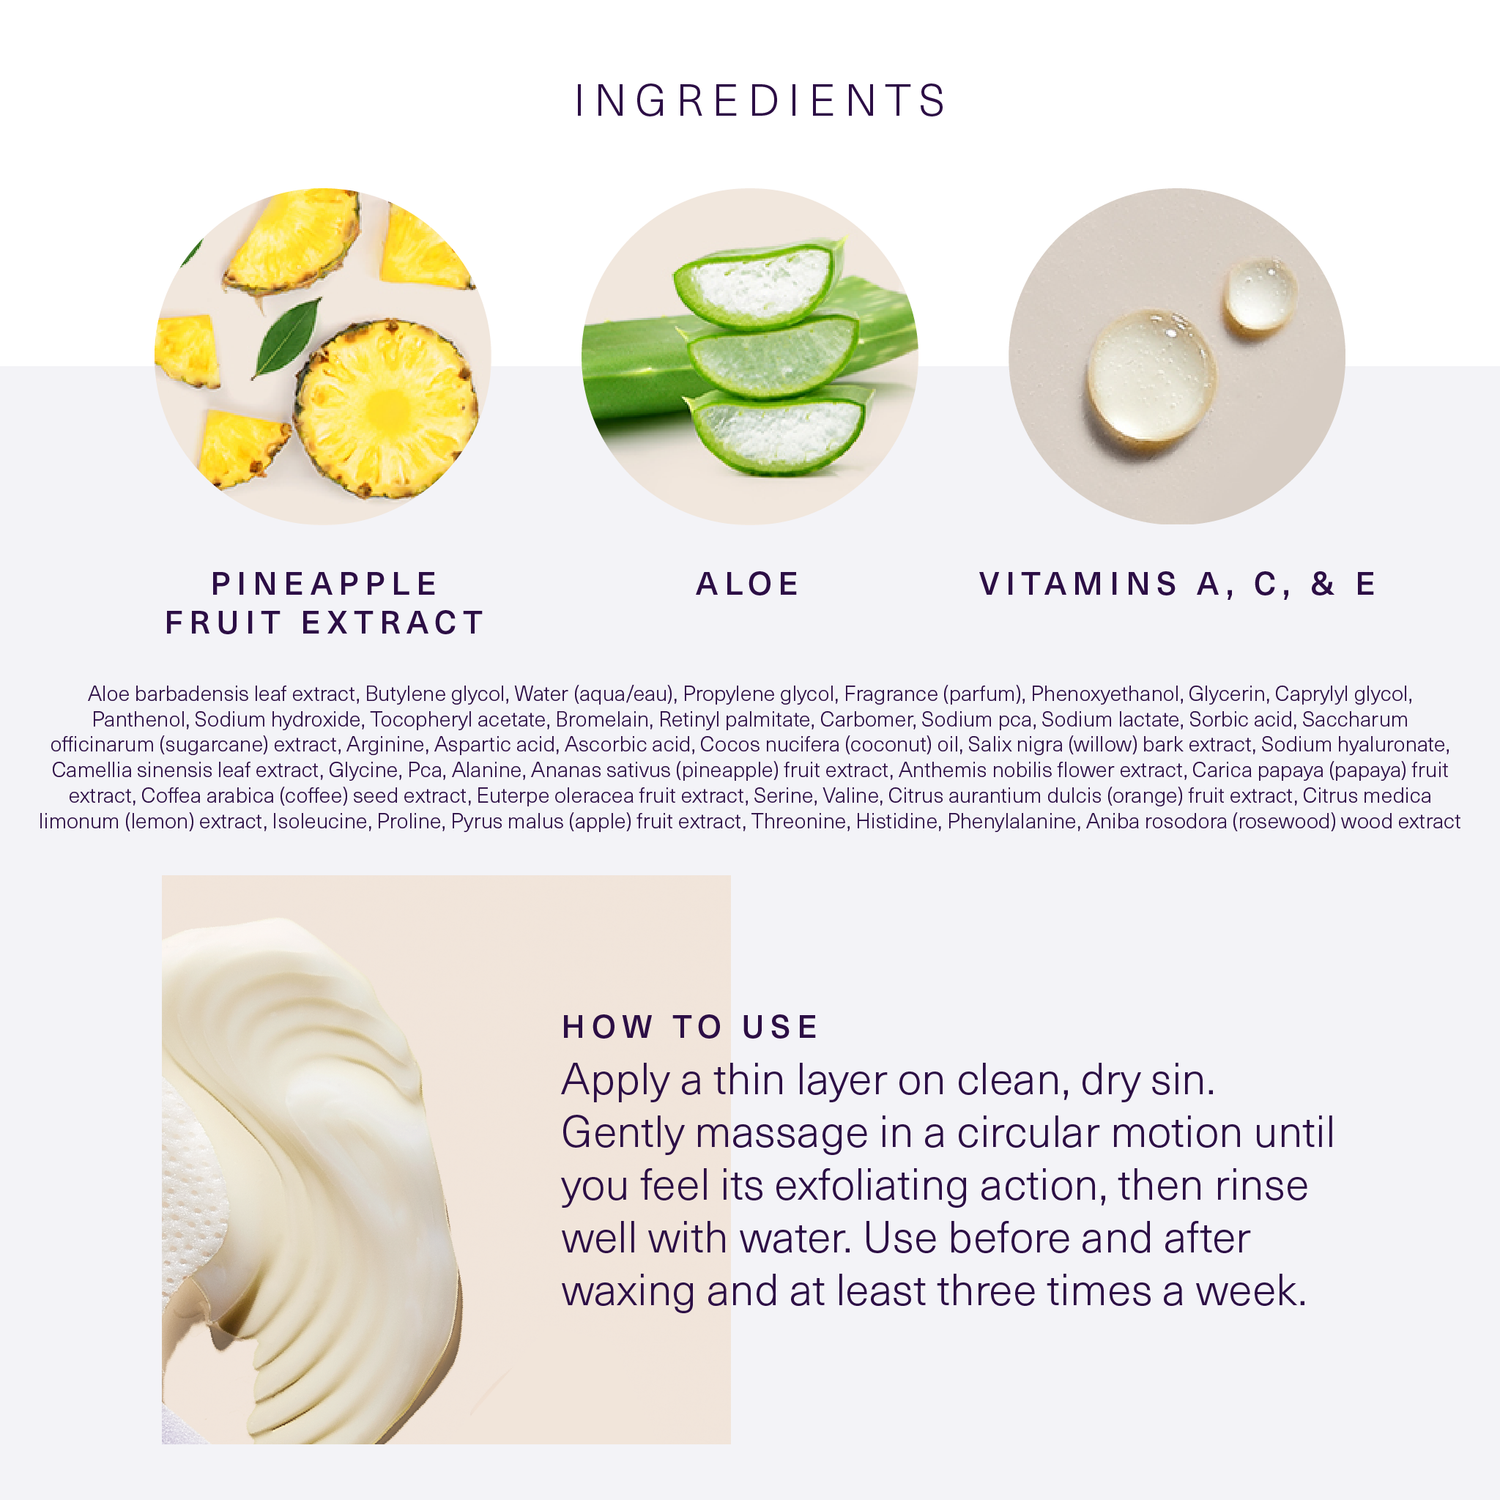 Ingredients and how to use European Wax Center Exfoliating Gel including images of pineapple fruit extract, aloe, and vitamins A, C, and E on a white background